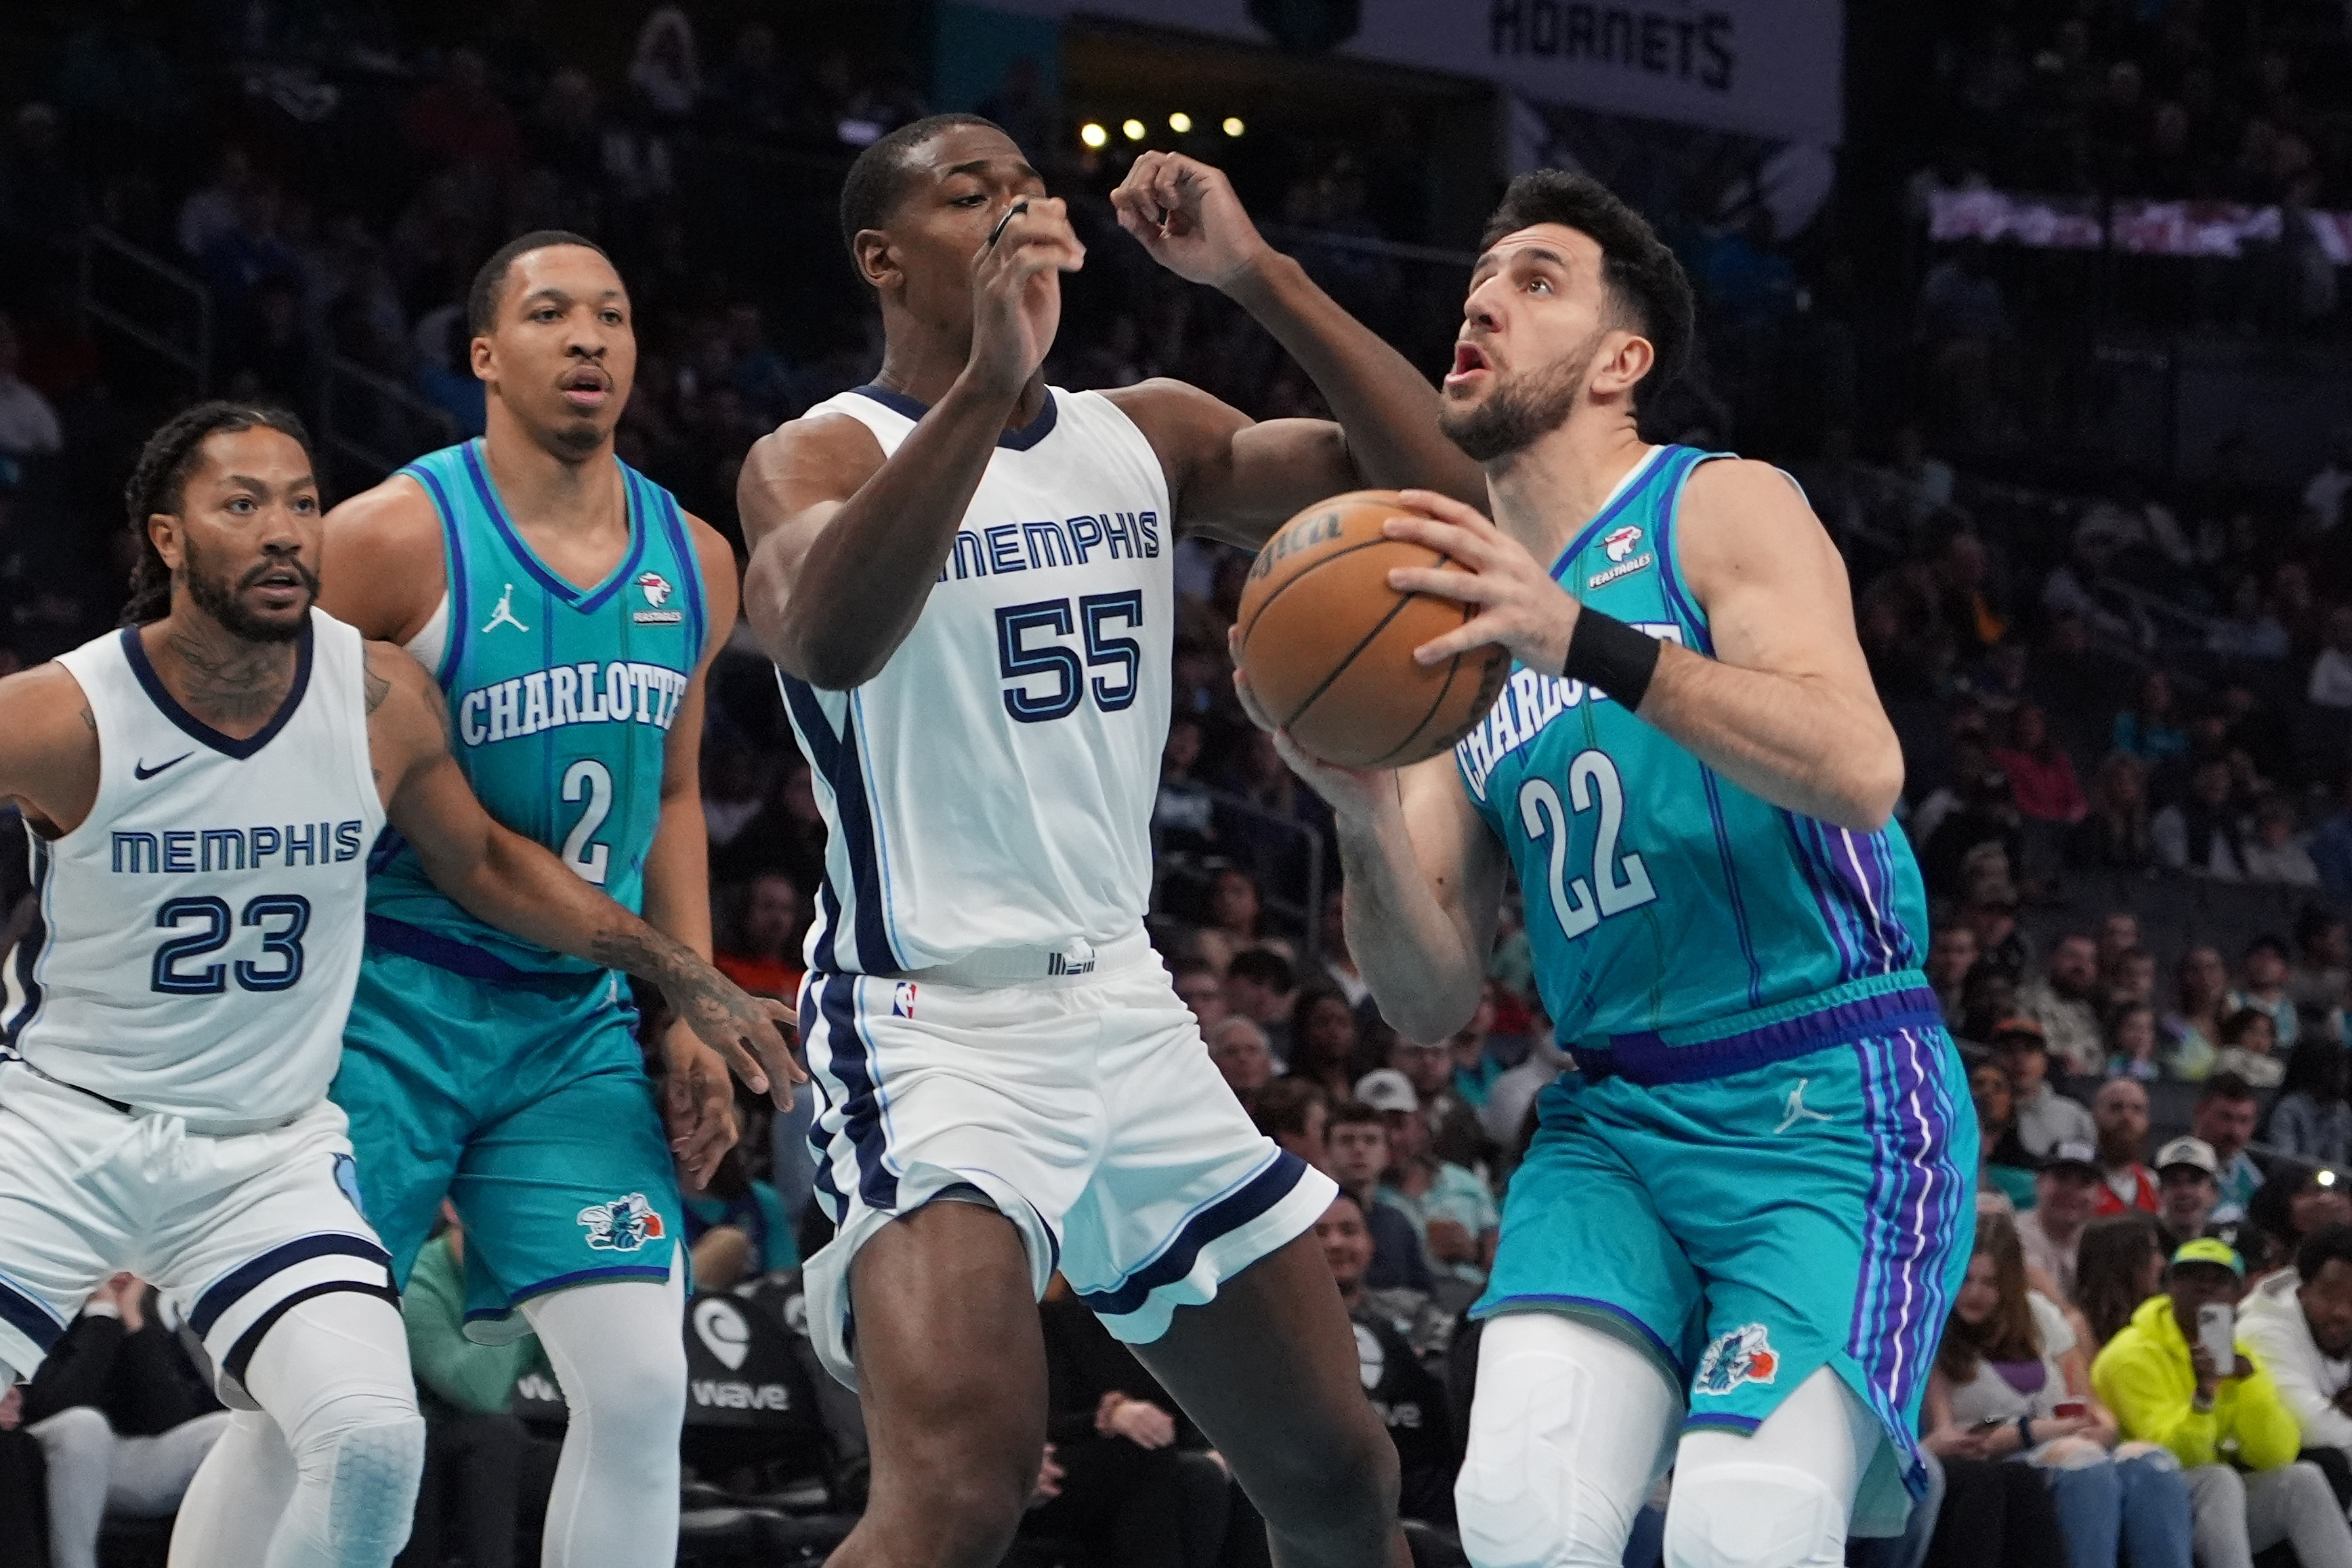 Preview/Game Details: Brandon Miller and the Hornets face reeling